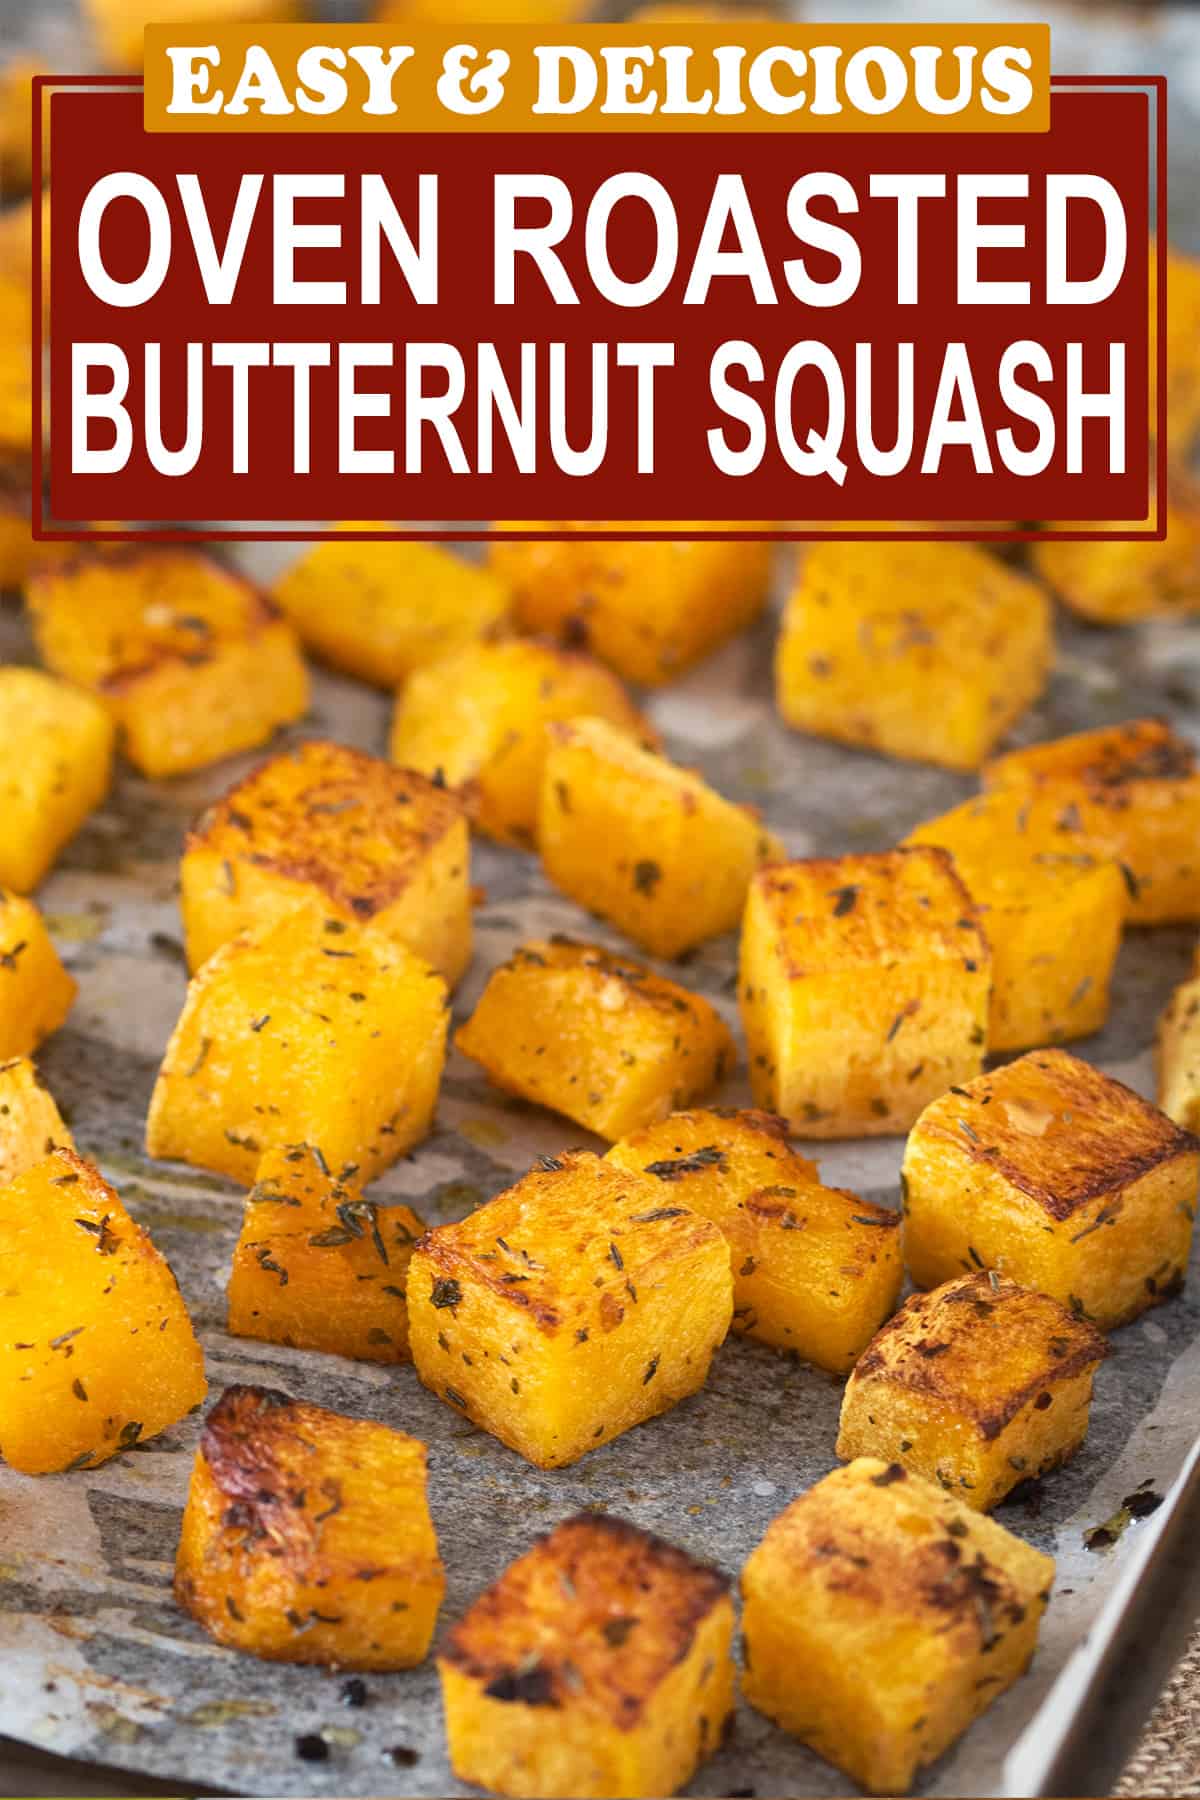 Baked butternut squash laid out on a sheet pan with sprinkled seasonings. Post title is on top.